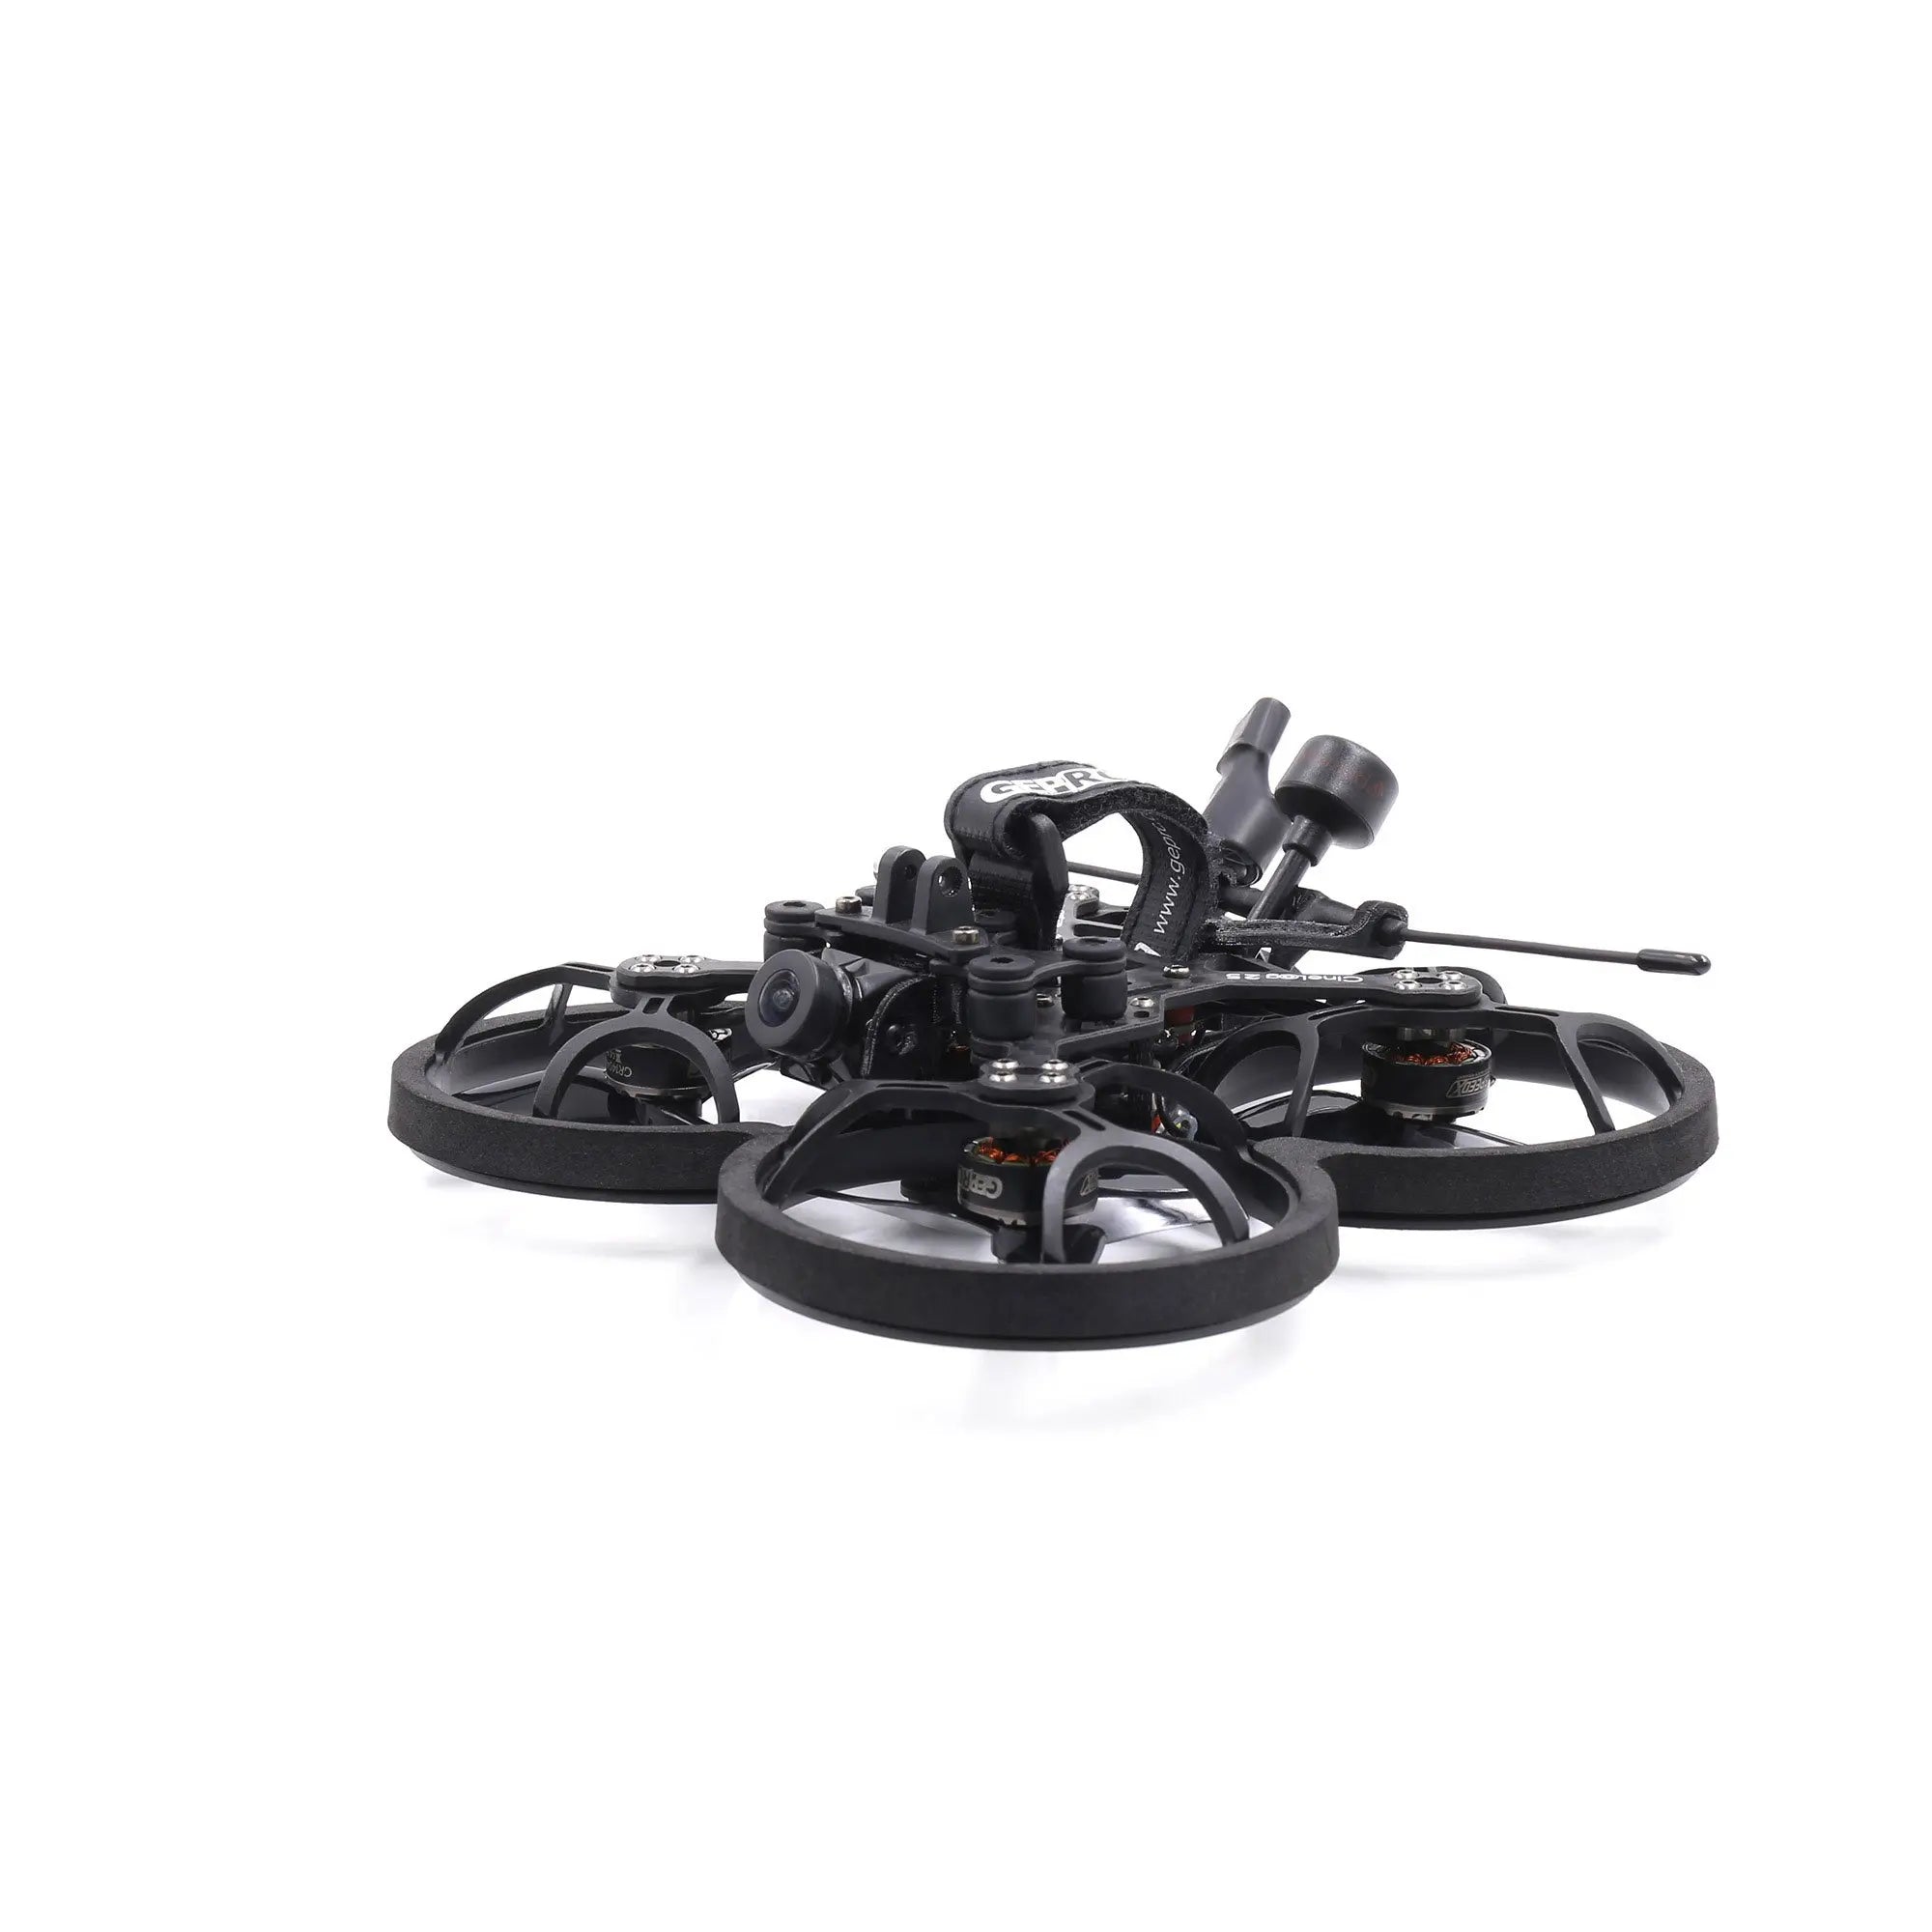 GEPRC CineLog25 HD CineWhoop Racing Drone, this drone is compatible with various mainstream cameras, including SMO 4K, Gopro6 